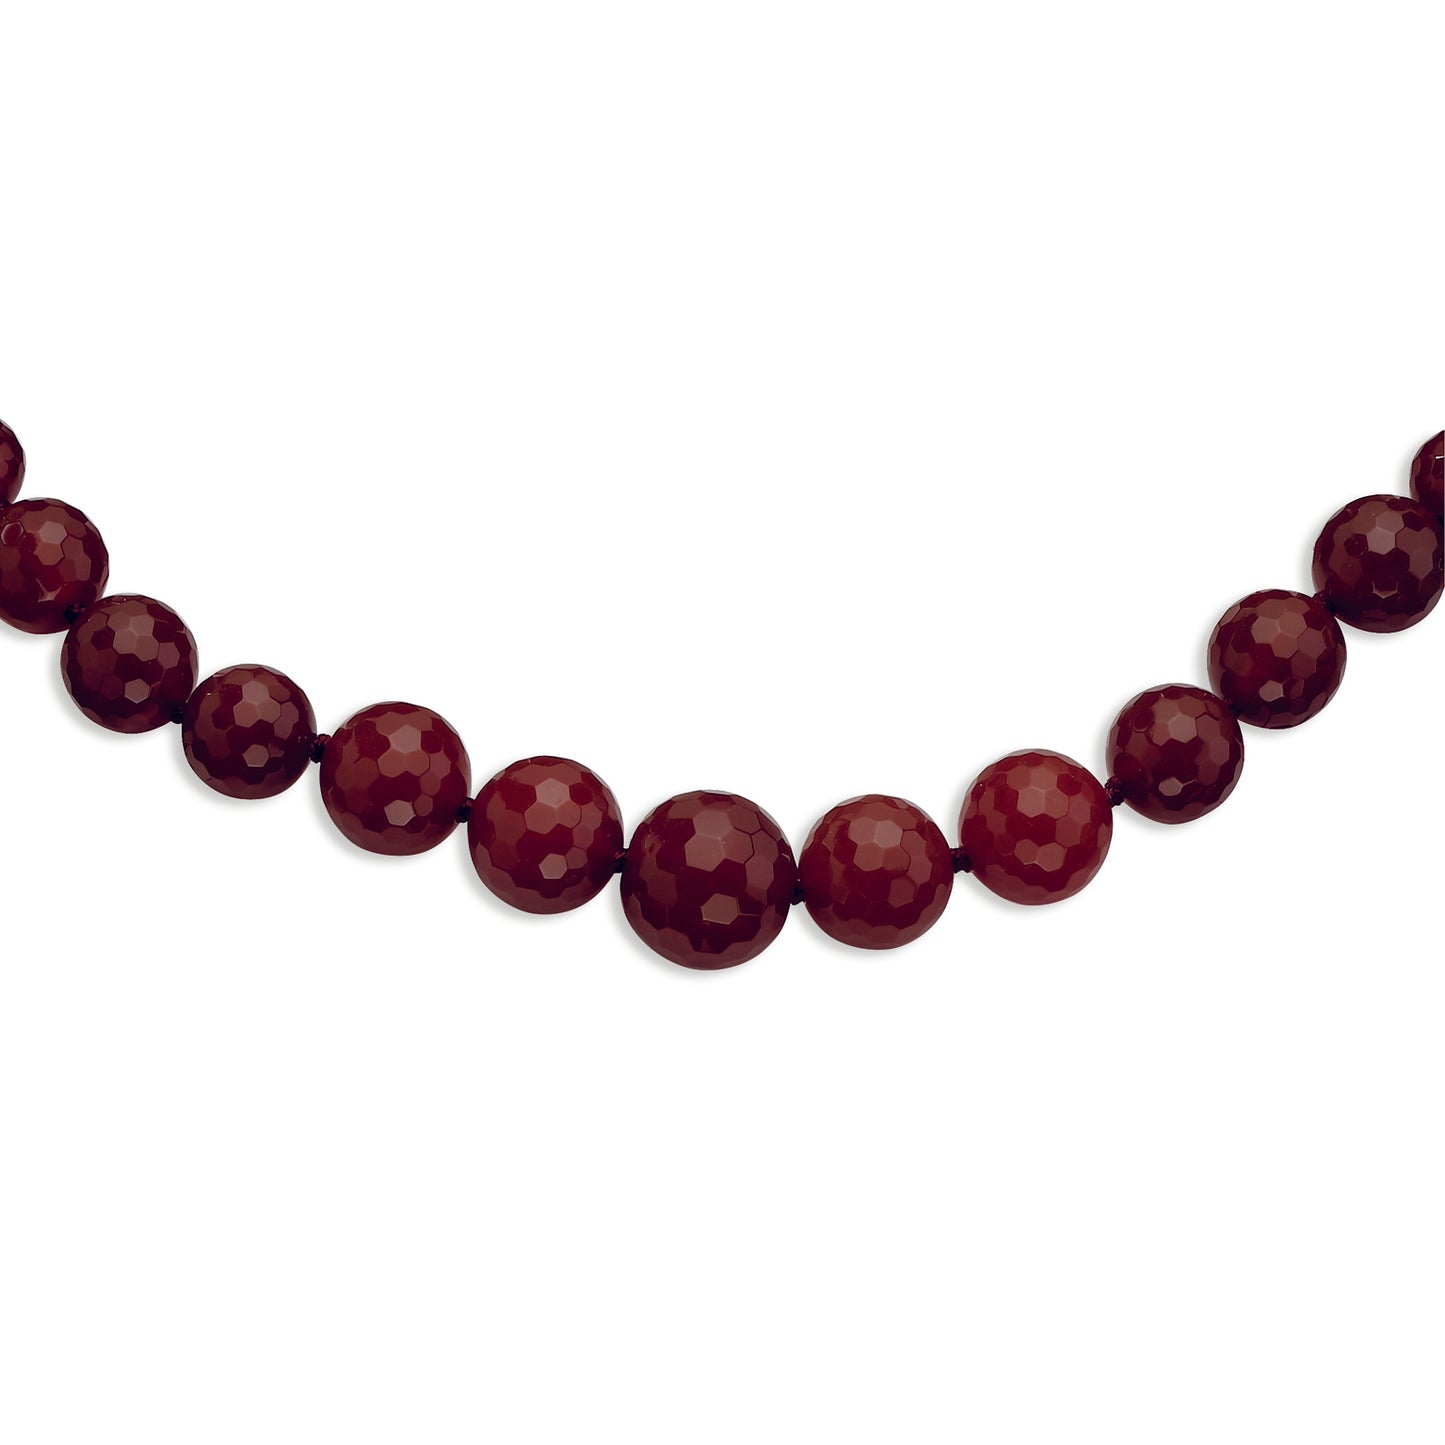 8-16mm Graduated Faceted Carnelian Necklace